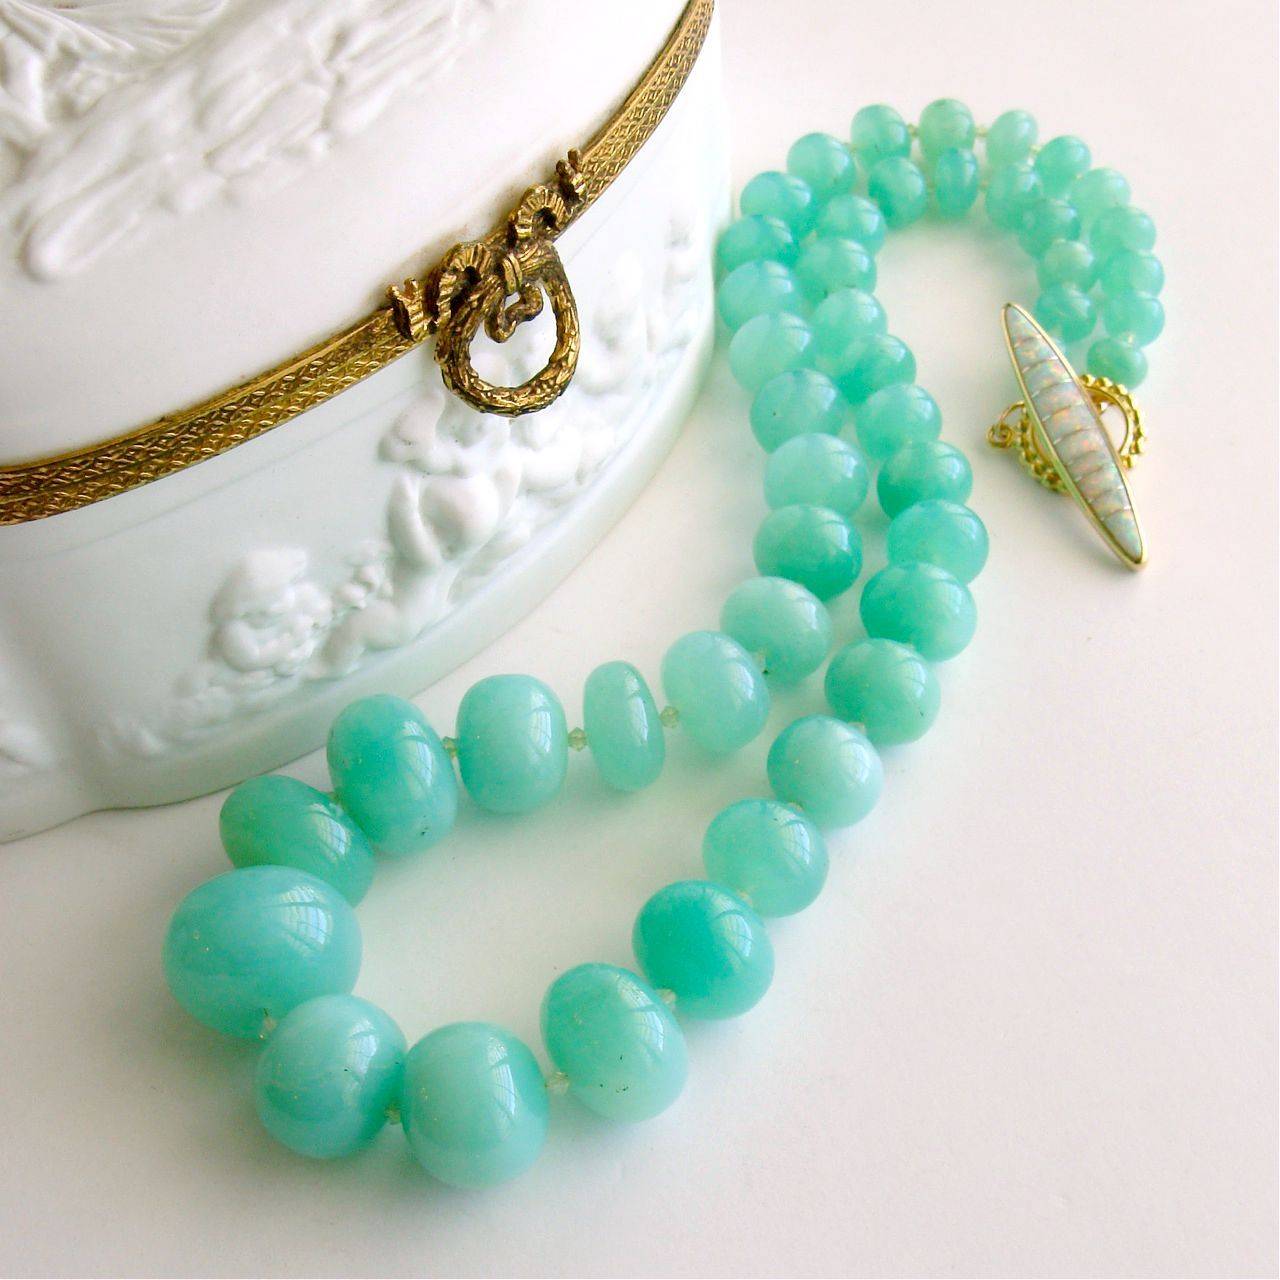 Courtney Necklace.

Chrysoprase has recently become one of the darling of the gem world and is immensely popular.  I believe it is the fresh spearmint green color and ease of pairing with other stones that makes it so alluring.  It tends to show